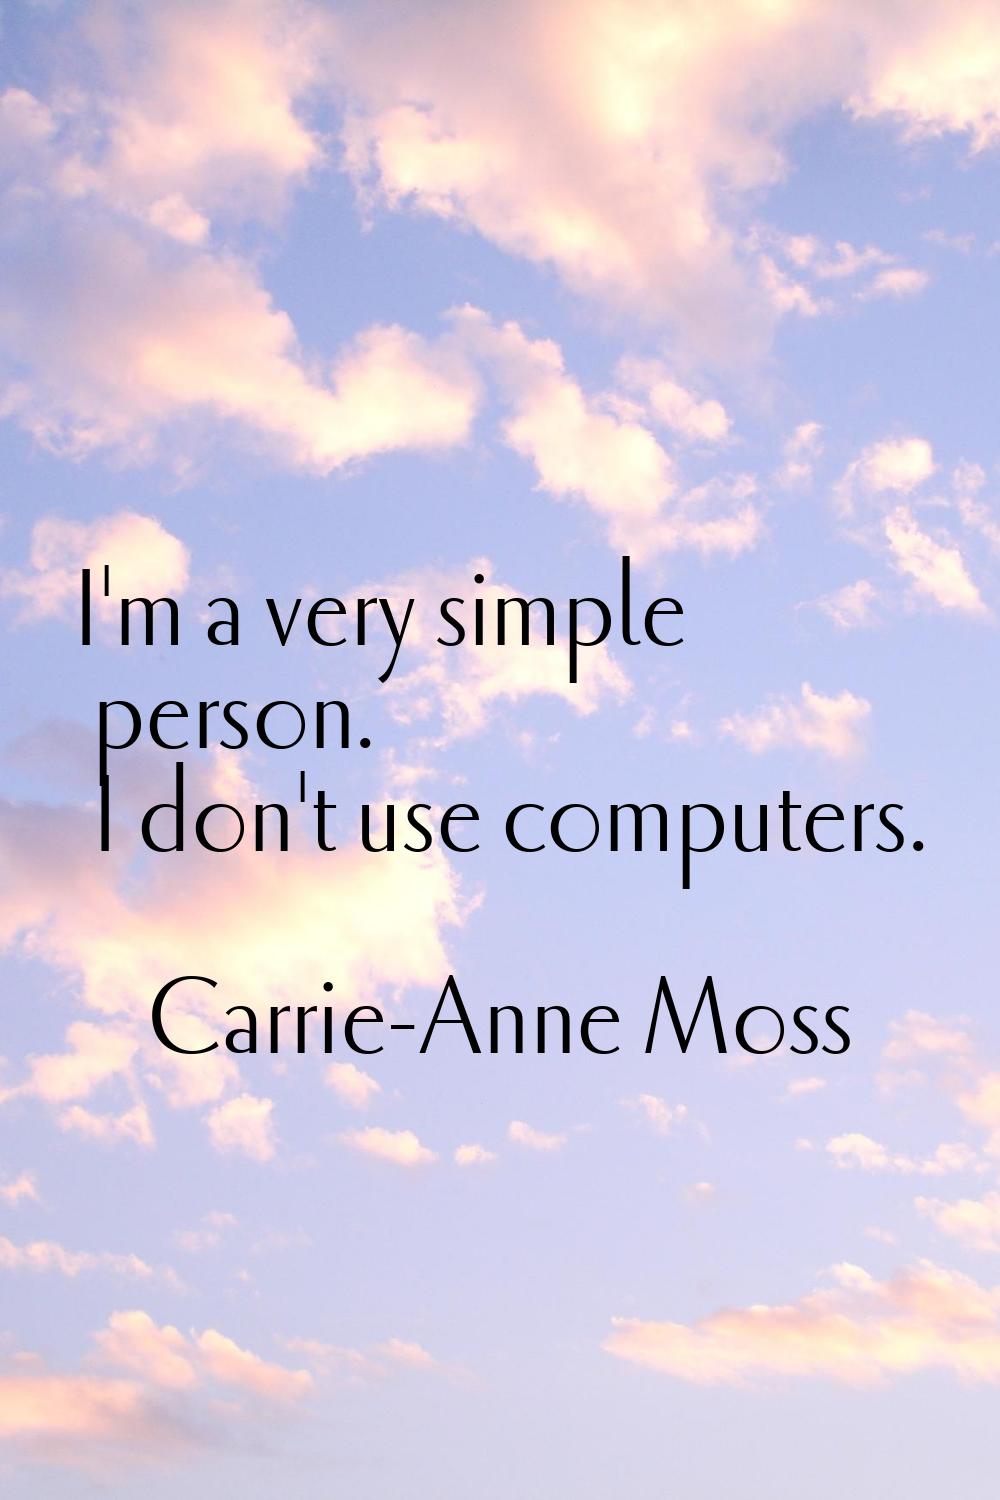 I'm a very simple person. I don't use computers.